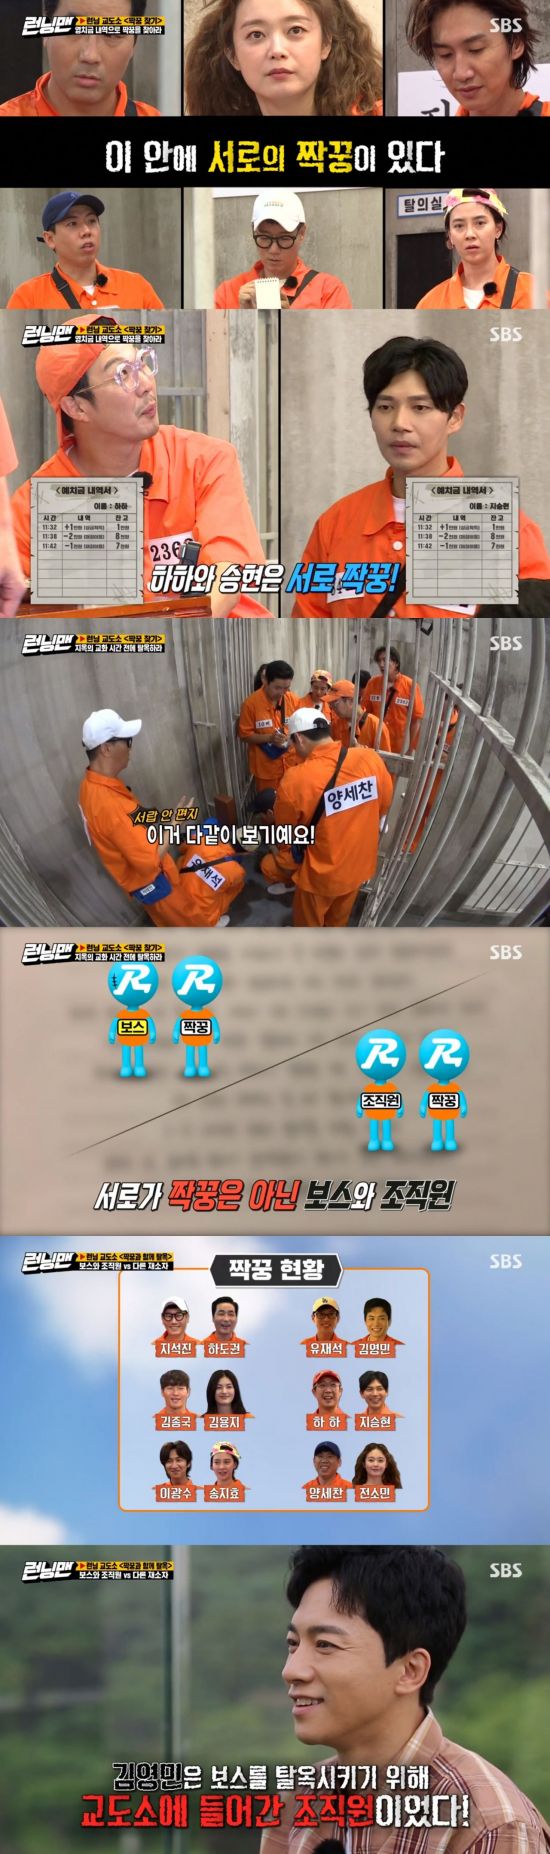 Kim Jong-kook and Kim Yongji won the SBS Running Man escape race broadcast on the afternoon of the 9th.On the day, Running Man was conducted as a prison escape race.Kim Yung-min, Ha Do-kwon, Ji Seung-hyun and Kim Yongji appeared as guests and participated in the race.Ha Do-kwon, who came out of Seoul National Universitys vocal music department, called a verse of O Solemio and admired the members.Ji Seung-hyun revealed that he appeared in the drama with Song Ji-hyo and Jeon So-min, who recognized Song Ji-hyo but did not recognize him.However, Yoo Jae-Suk also laughed and laughed when he forgot that he had performed with Ji Seung-hyun in the past.Kim Yung-min was actually a well-spoken 13-year-old husband, unlike the World of Couples character.At this time, Yoo Jae-Suk mentioned the song Out of her and Kim Yung-min said it was a favorite song.So when Yoo Jae-Suk was in the lead, Kim Yung-min started dancing to the song and made the members laugh.The members had to find their own pairs, which benefited from the pairs and gained In-N-Out Burger, so they could reason with the results of the game.The first mission started rugby Kyonggi, which was a Kyonggi, with men tied up hands and feet and women tied up.Team Konyaspor team Ji Suk-jin - Yang Se-chan - Song Ji-hyo - Ha Do-kwon, blue team Kim Jong-kook - Haha - Kim Yung-min - Kim Yongji, yellow team Yoo Jae-Suk - Lee Kwang-soo - Jeon So-min - Ji Seung-hyun So, we divided them into three teams.The Konyaspor team looked the weakest, but with unexpected propaganda, Ji Suk-jin admired it as we are so good.But in the end, Kim Jong-kooks performance won the blue team.In the meantime, when Kim Yung-mins name tag was changed to golden, the members doubted that Kim Yung-min won the defense right at the canteen.I could go to the canteen and say, I came to draw a big picture, and buy a disposable defense.On the other hand, the pairs were Ji Suk-jin - Ha Do-kwon, Yoo Jae-Suk - Kim Yung-min, Kim Jong-kook - Kim Yongji, Haha - Ji Seung-hyun, Lee Kwang-soo - Song Ji-hyo, Yang Se-chan - Jeon So-min.The members who succeeded in opening a drawer with a hint with a secret number that they found out by combining the prisoners number of the youngest members found out that one member was put in to save Bose Corporation.If the member of the organization succeeds in breaking out with Bose Corporation, Bose Corporation will win, and if Bose Corporation is in-N-Out Burger, the member will become the next Bose Corporation.Now we had to figure out who was the member and Bose Corporation.Among the members, Kim Yung-min was the member, Bose Corporation was Ji Suk-jin; Ji Suk-jin noticed that Kim Yung-min was the member.However, the members suspected that Ji Seung-hyun was Bose Corporation.The note found in the cleaning toolbox then said that it could exchange five name tags and five digits.Ji Suk-jin, Ha Do-kwon, Kim Yung-min and Yoo Jae-Suk colluded to escape.At this time, Ha Do-kwon, who was collecting a name tag for his son, released four name tags.In the absence of one chapter, Ji Suk-jin takes the name tag of Yoo Jae-Suk and receives the number.But Ha Do-kwon, who puts a paper with a password in his mouth, decides to receive the product and hands the number to Kim Jong-kook.In the end, Kim Jong-kook and his partner Kim Yongji became the final winners.Kim Jong-kook, who received the product, handed the product to Ha Do-kwon, who gave him the number.SBS entertainment Running Man is broadcast every Sunday at 5 pm.